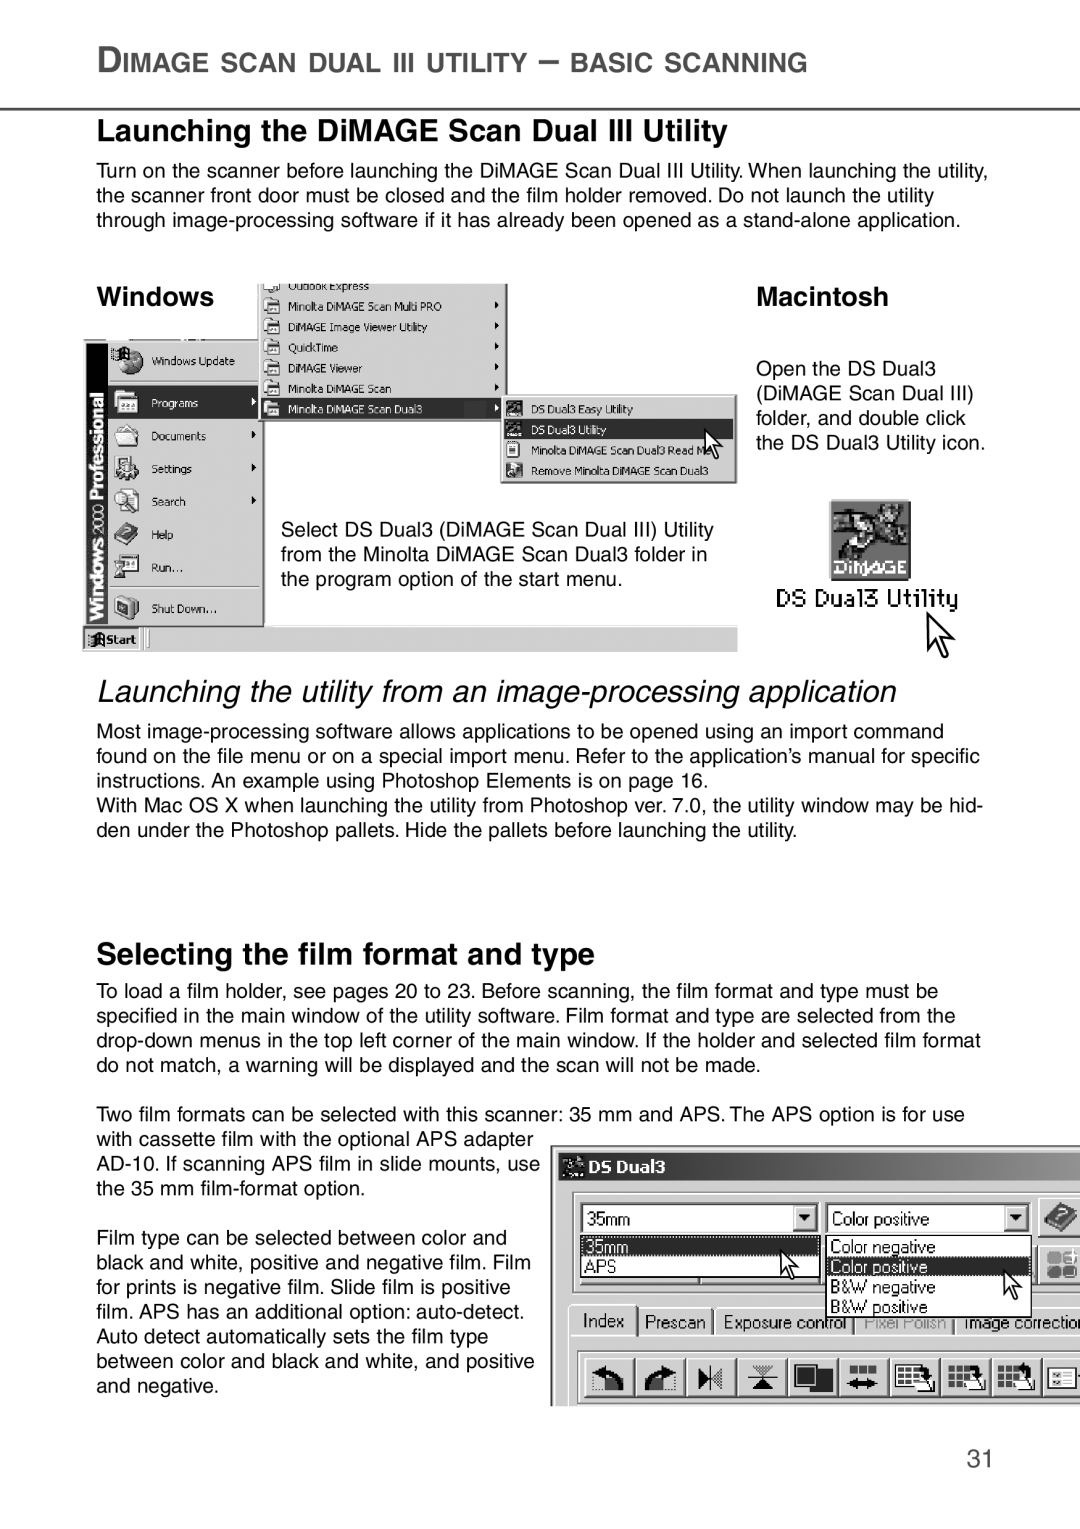 Konica Minolta AF-2840 Launching the DiMAGE Scan Dual III Utility, Selecting the film format and type, Windows, Macintosh 